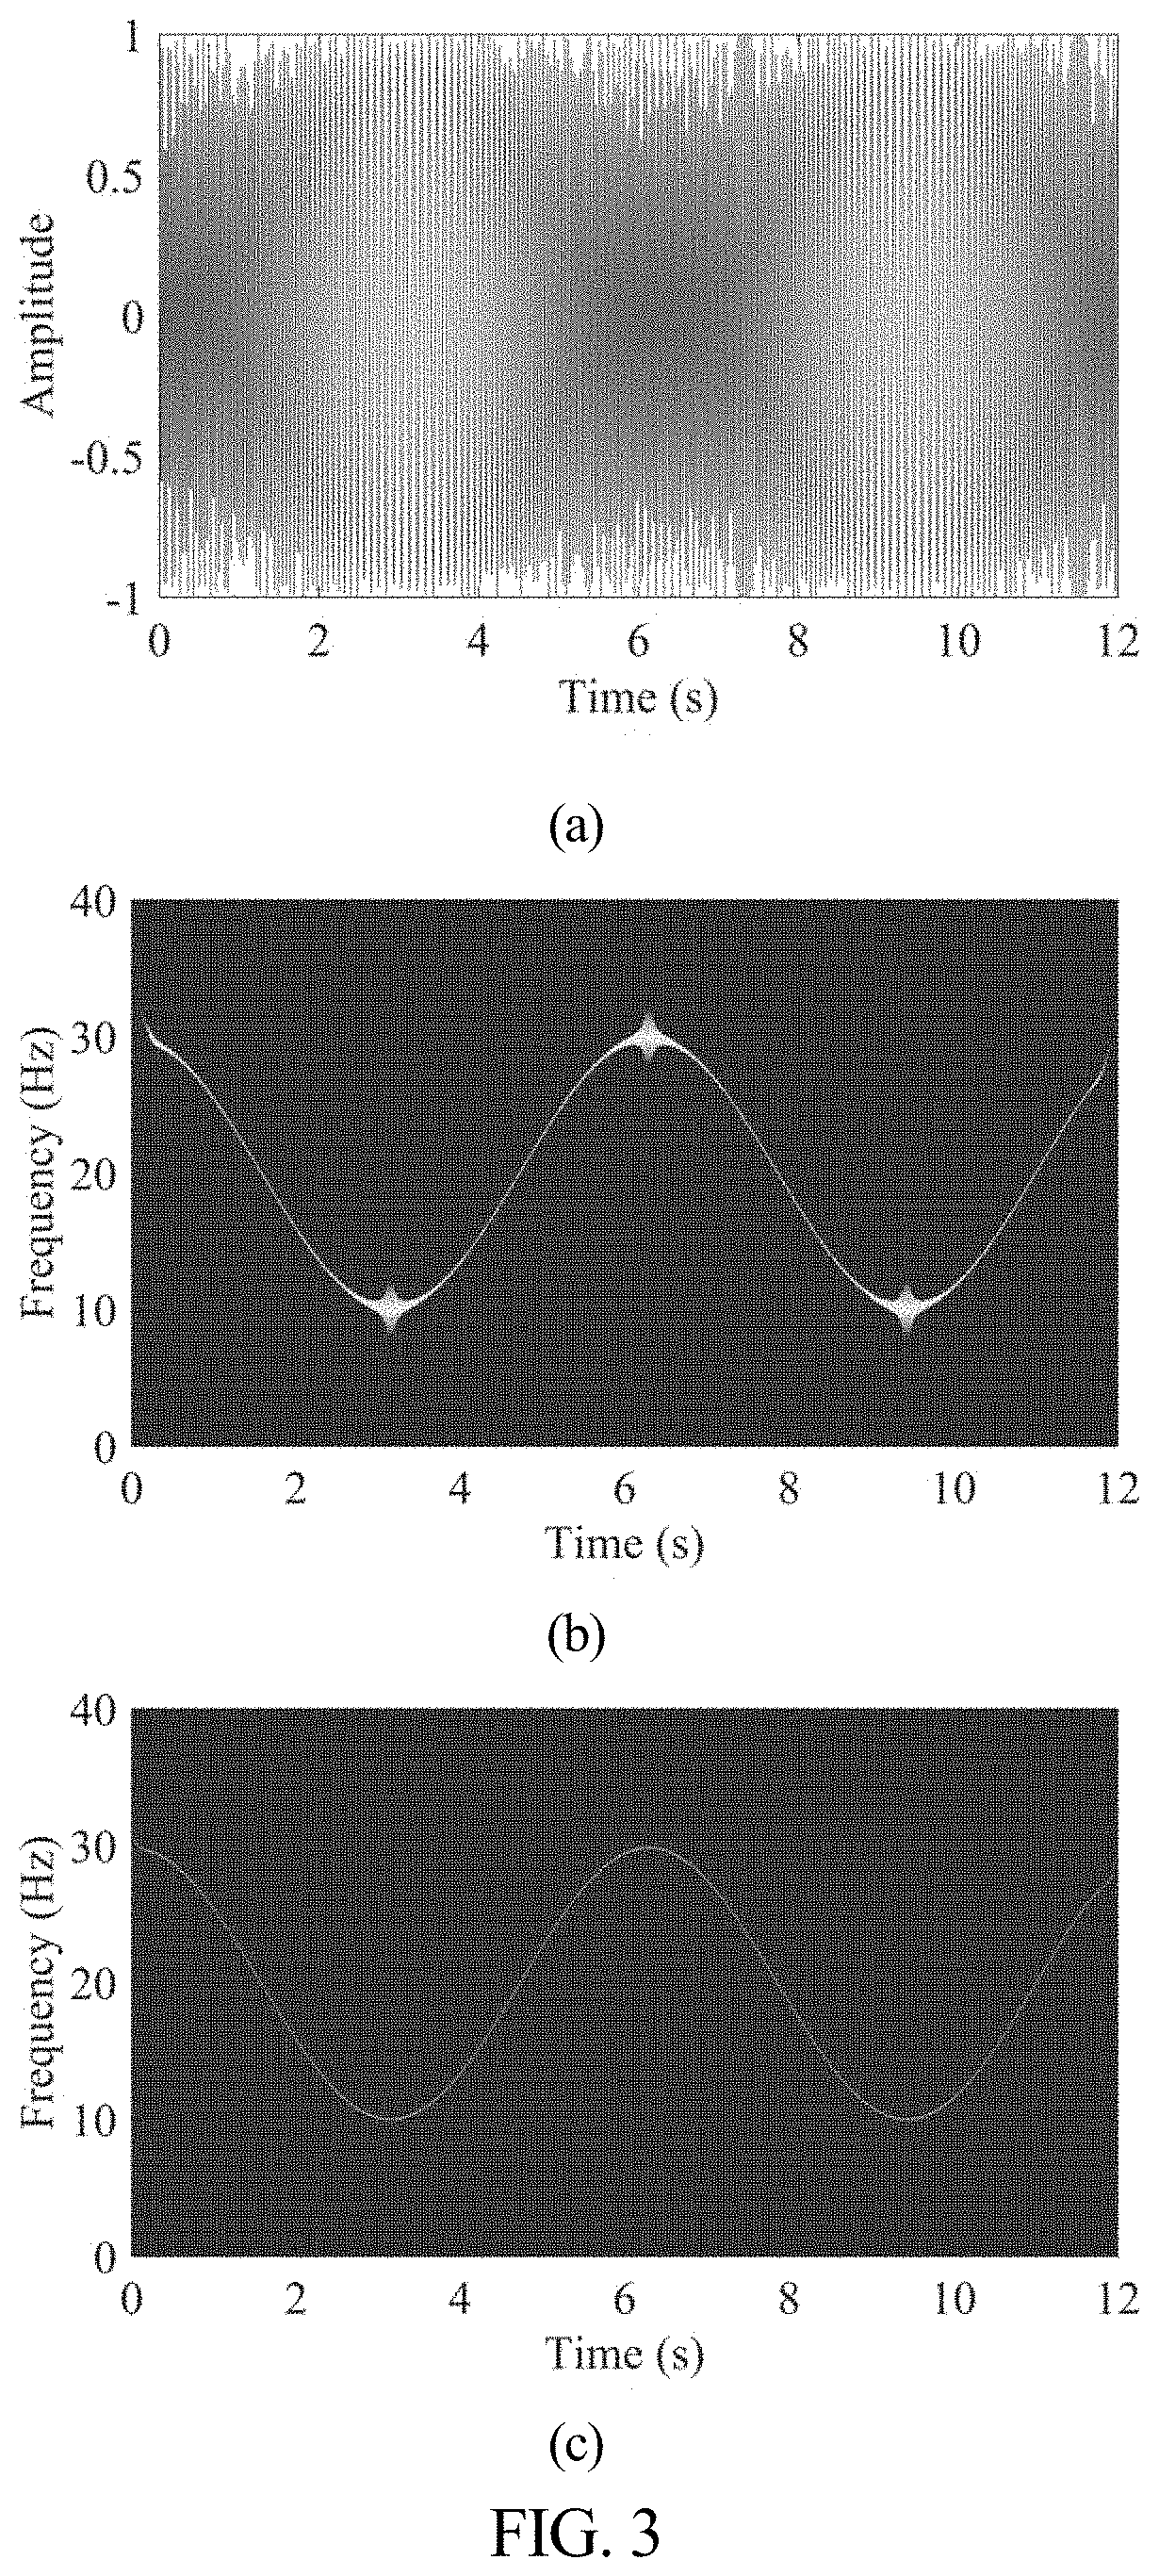 Seismic Time-Frequency Analysis Method Based on Generalized Chirplet Transform with Time-Synchronized Extraction